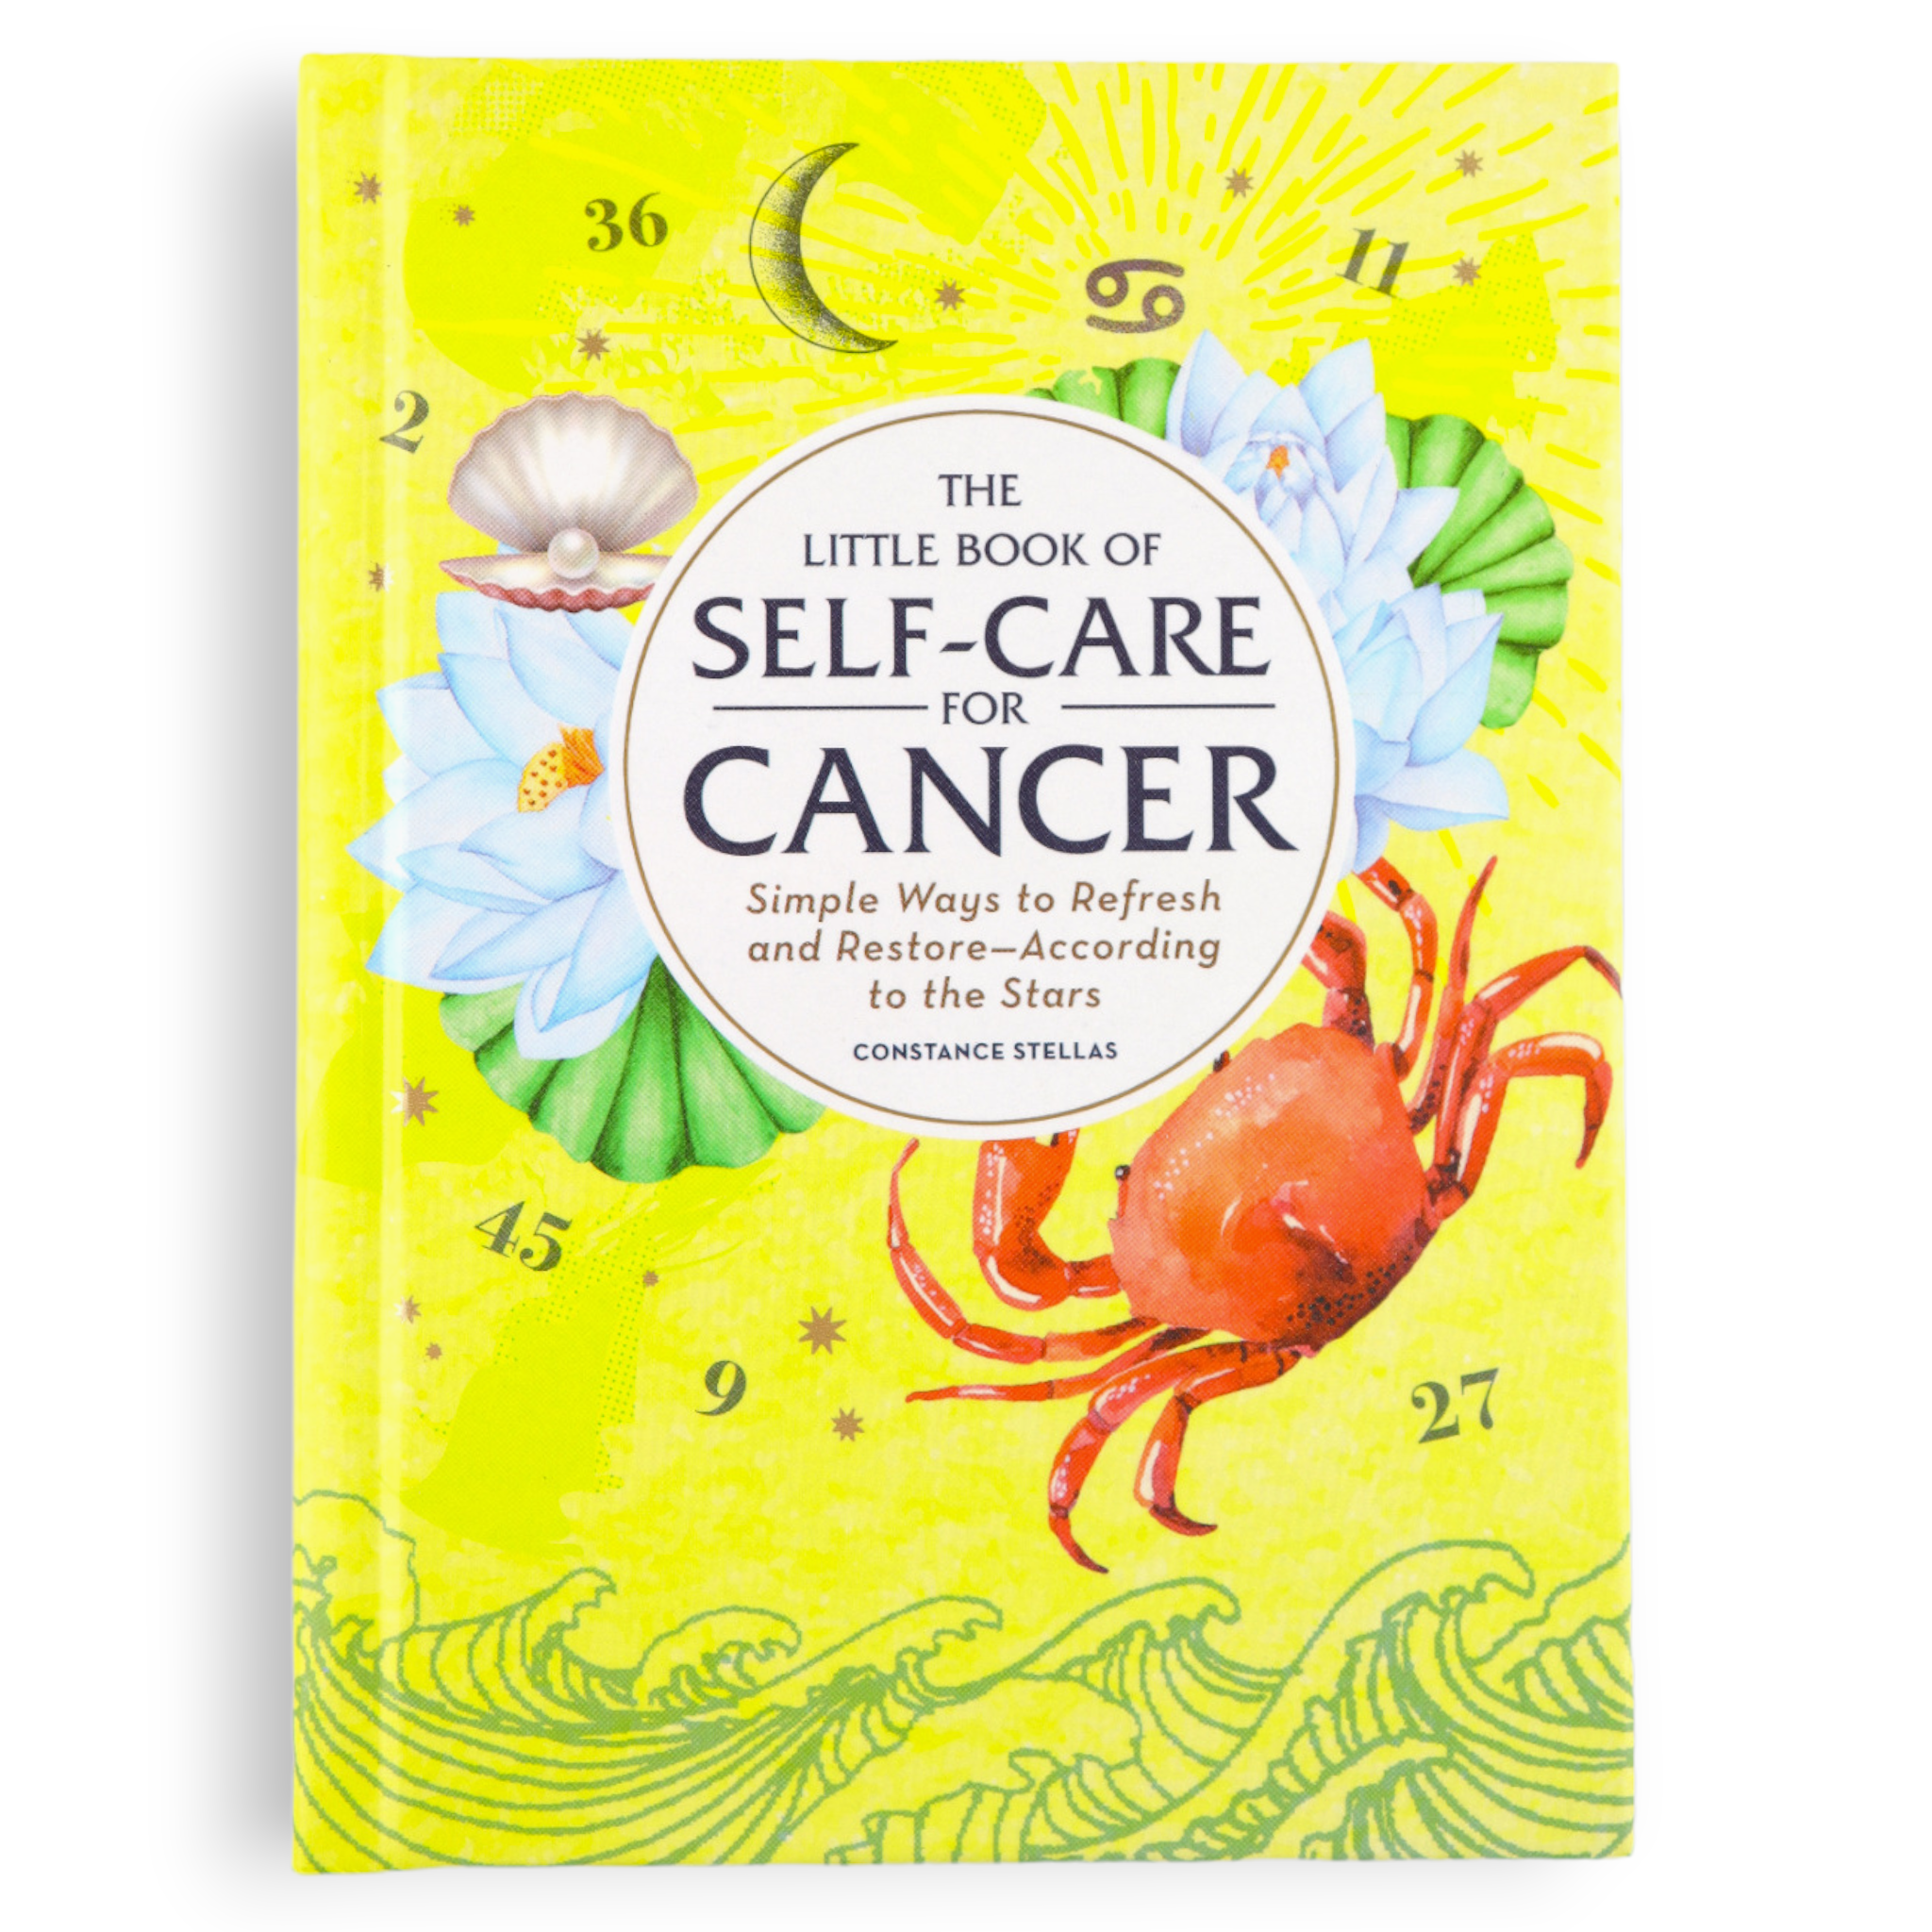 Self-care for Cancer